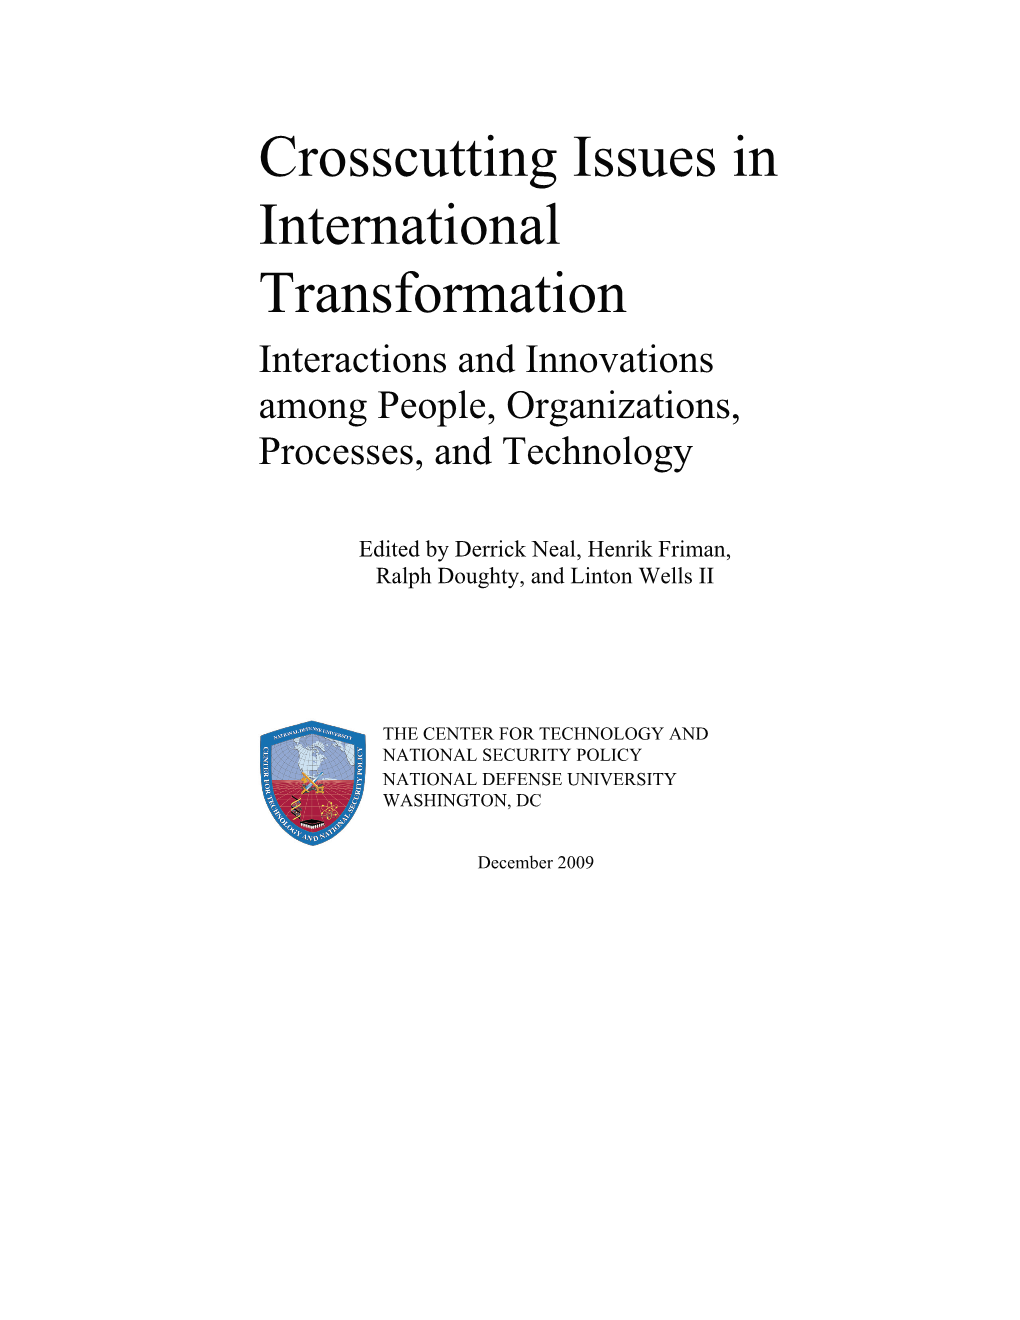 Crosscutting Issues in International Transformation Interactions and Innovations Among People, Organizations, Processes, and Technology